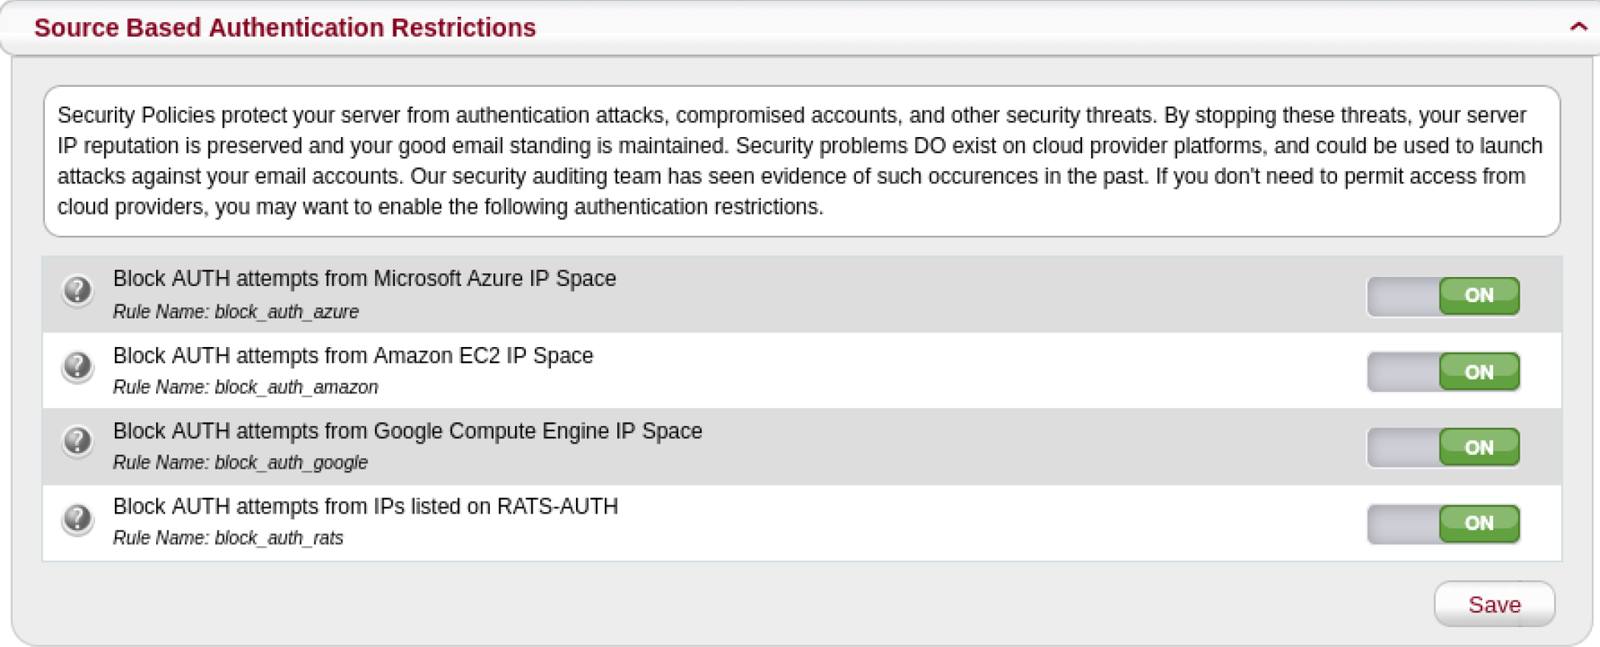 Screenshot of source based authentication restrictions page